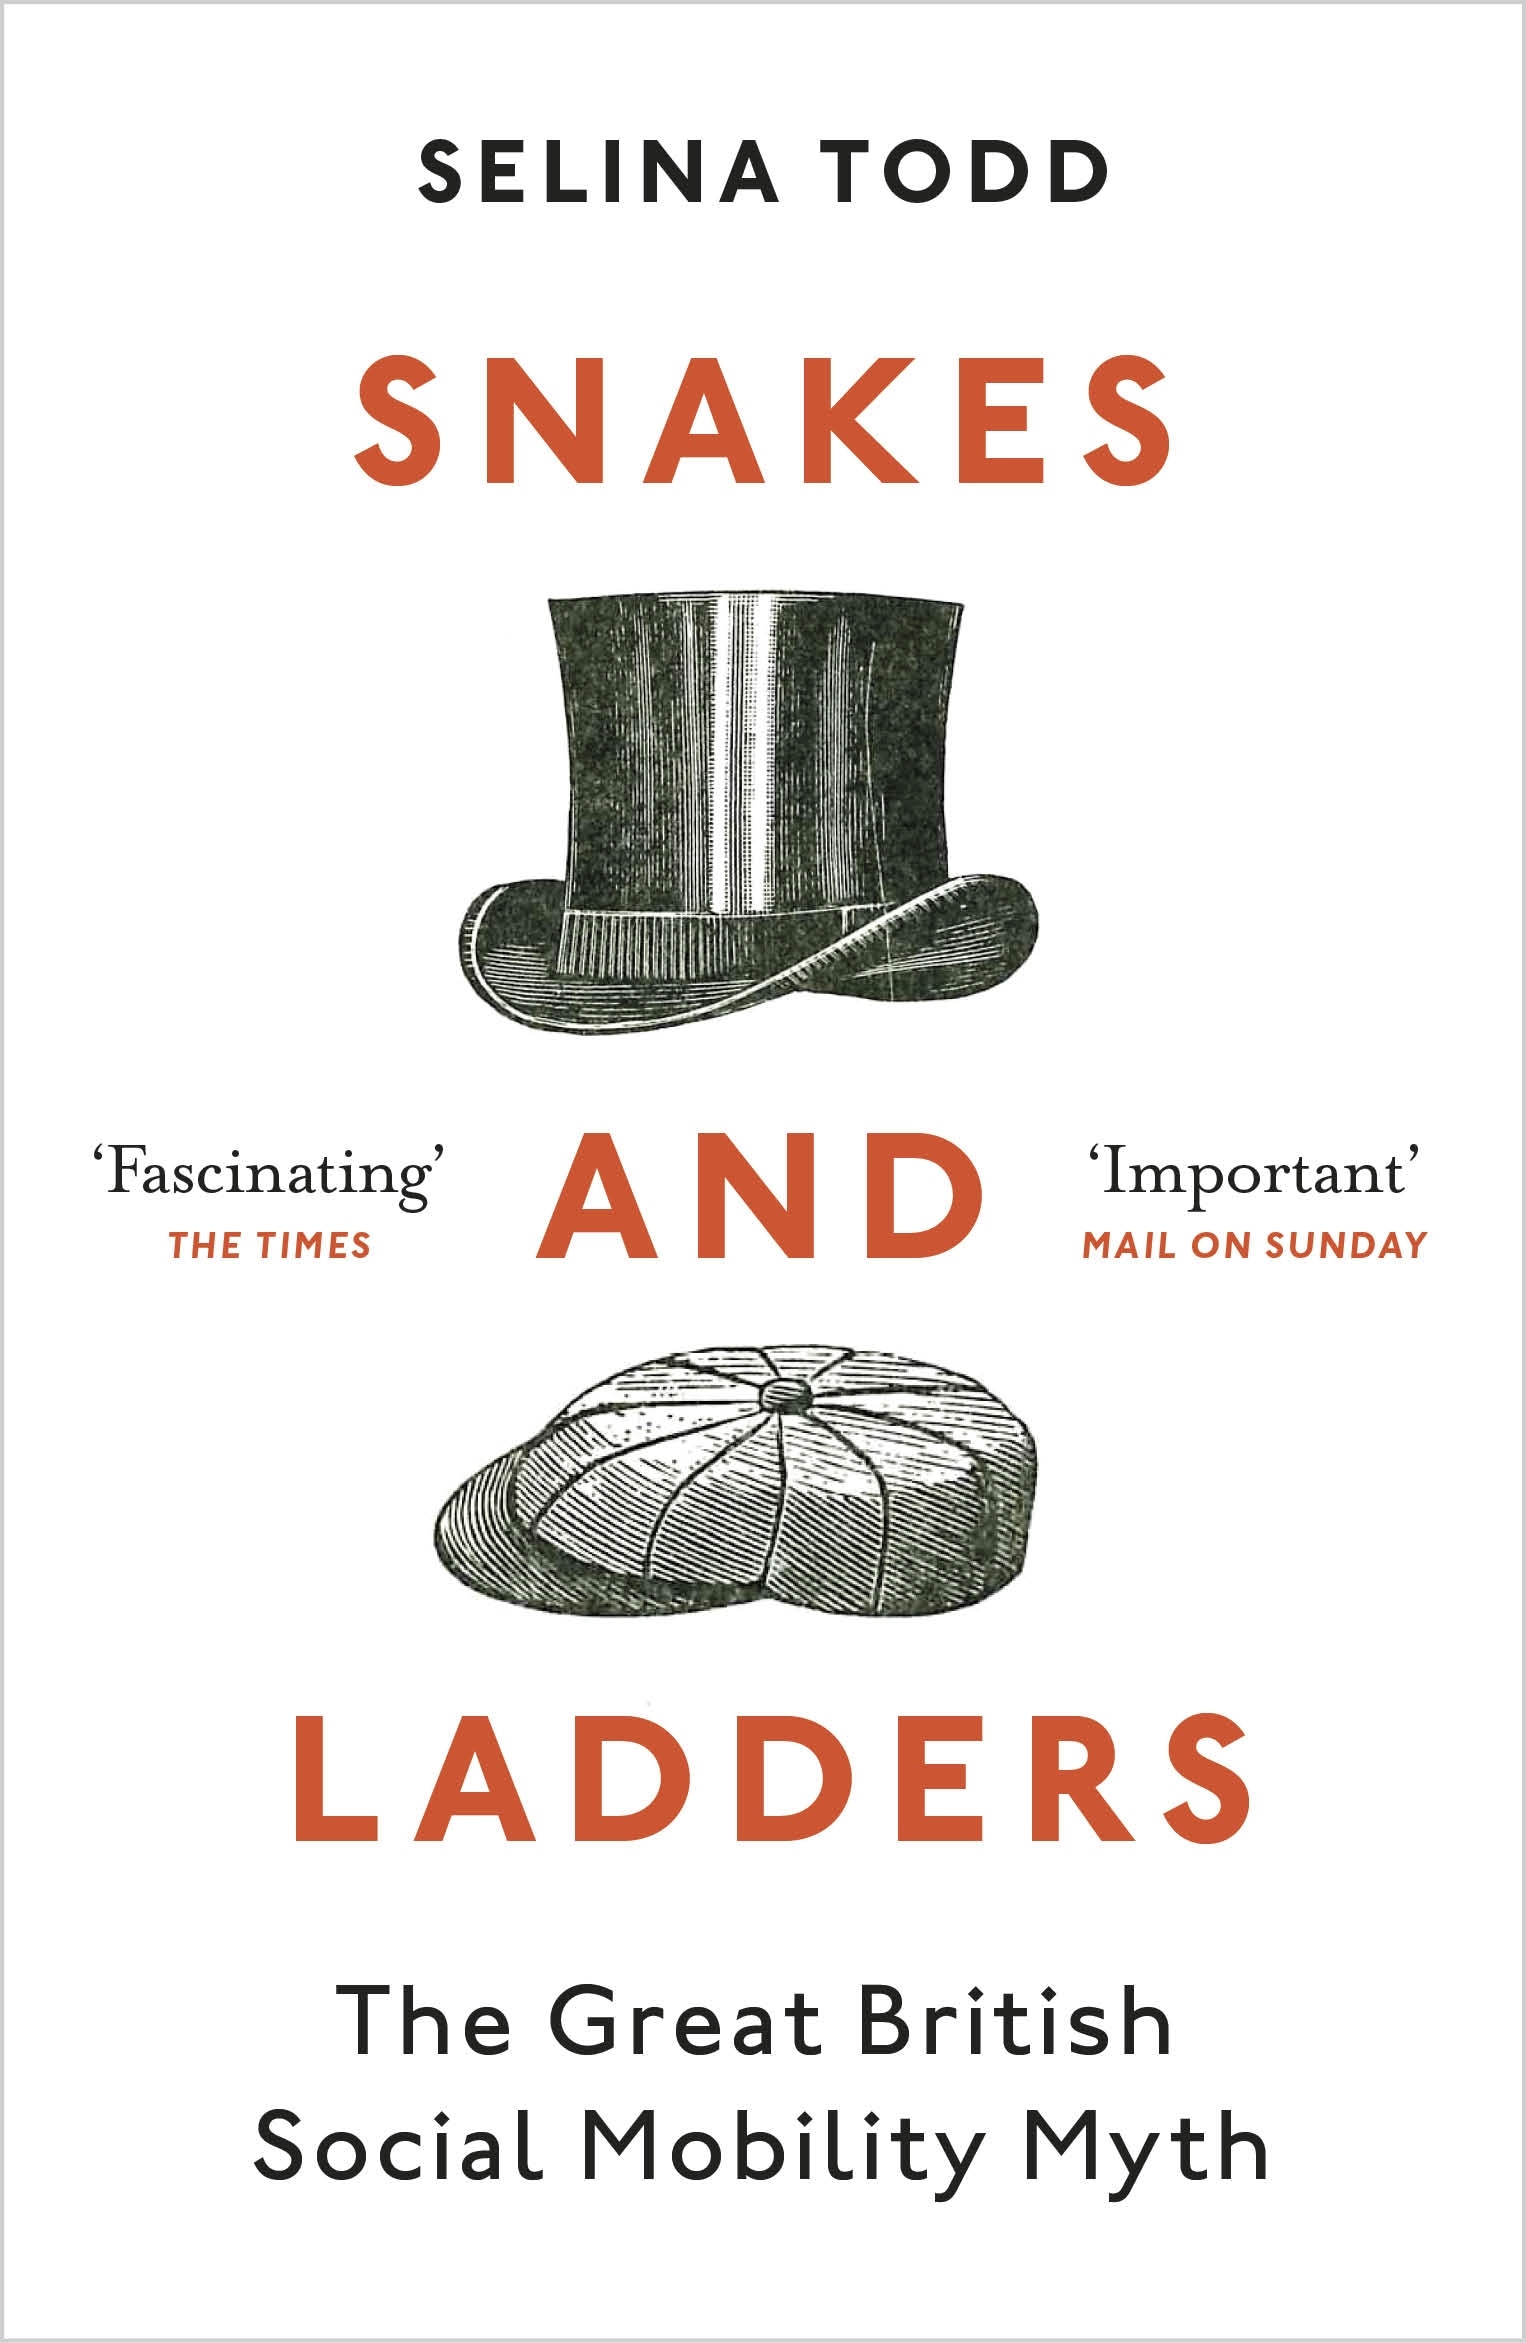 Book “Snakes and Ladders” by Selina Todd — November 10, 2022